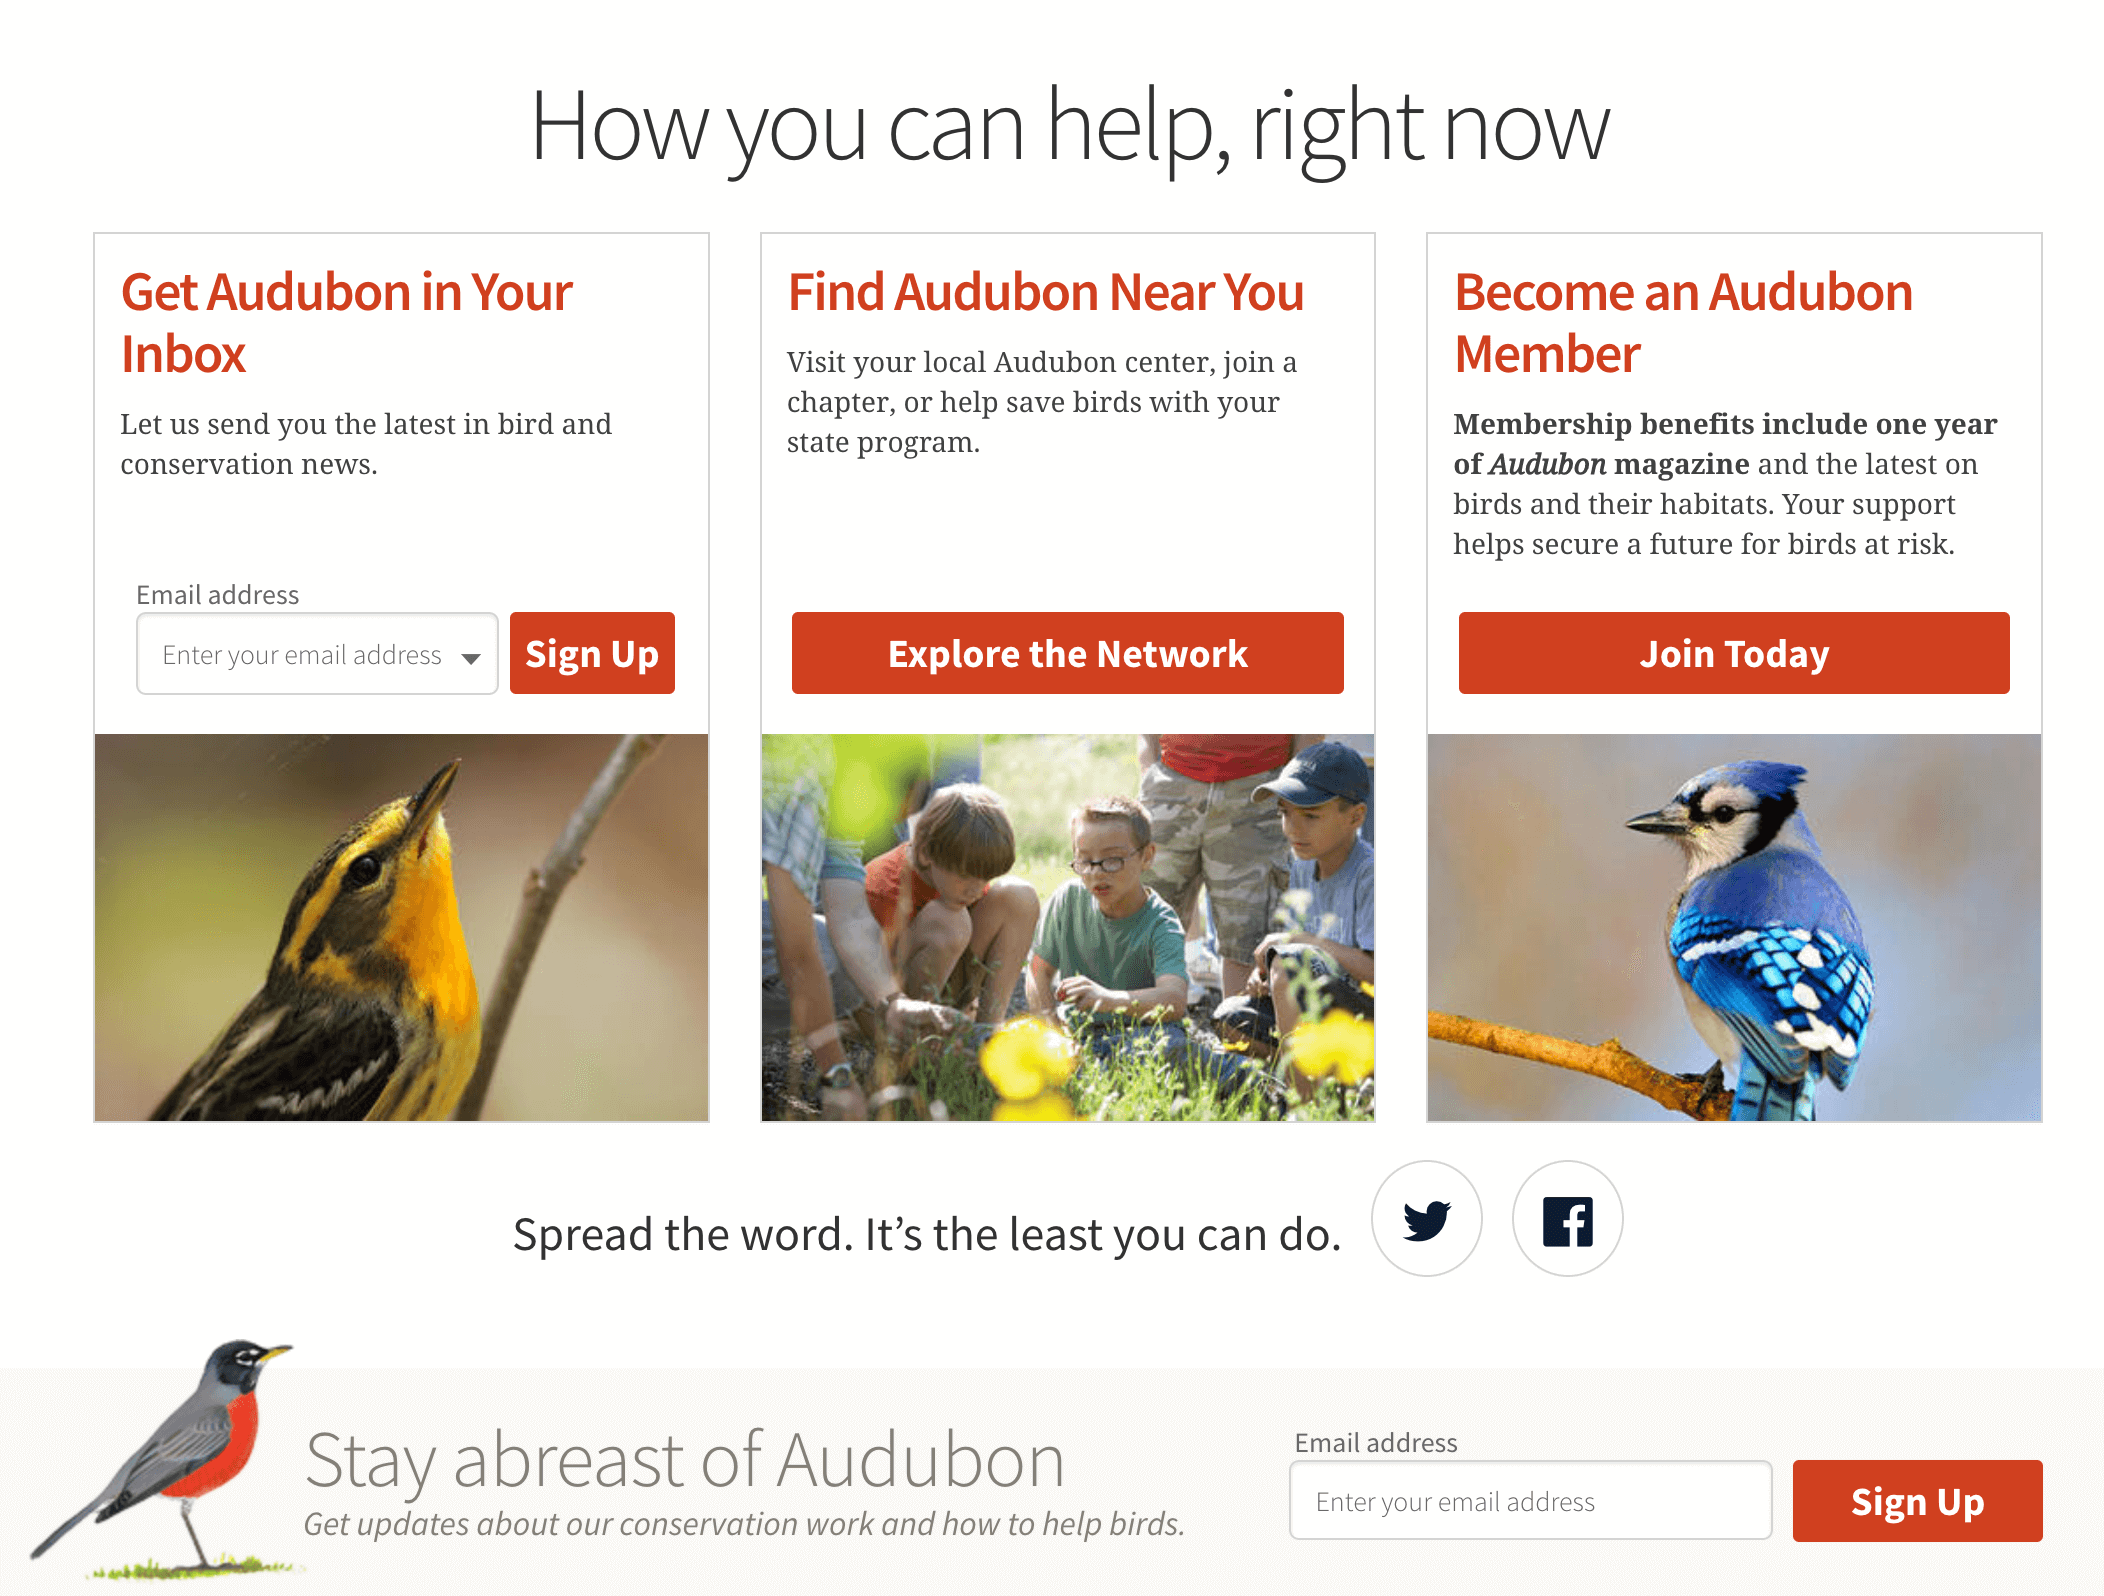 The National Audubon Society's home page